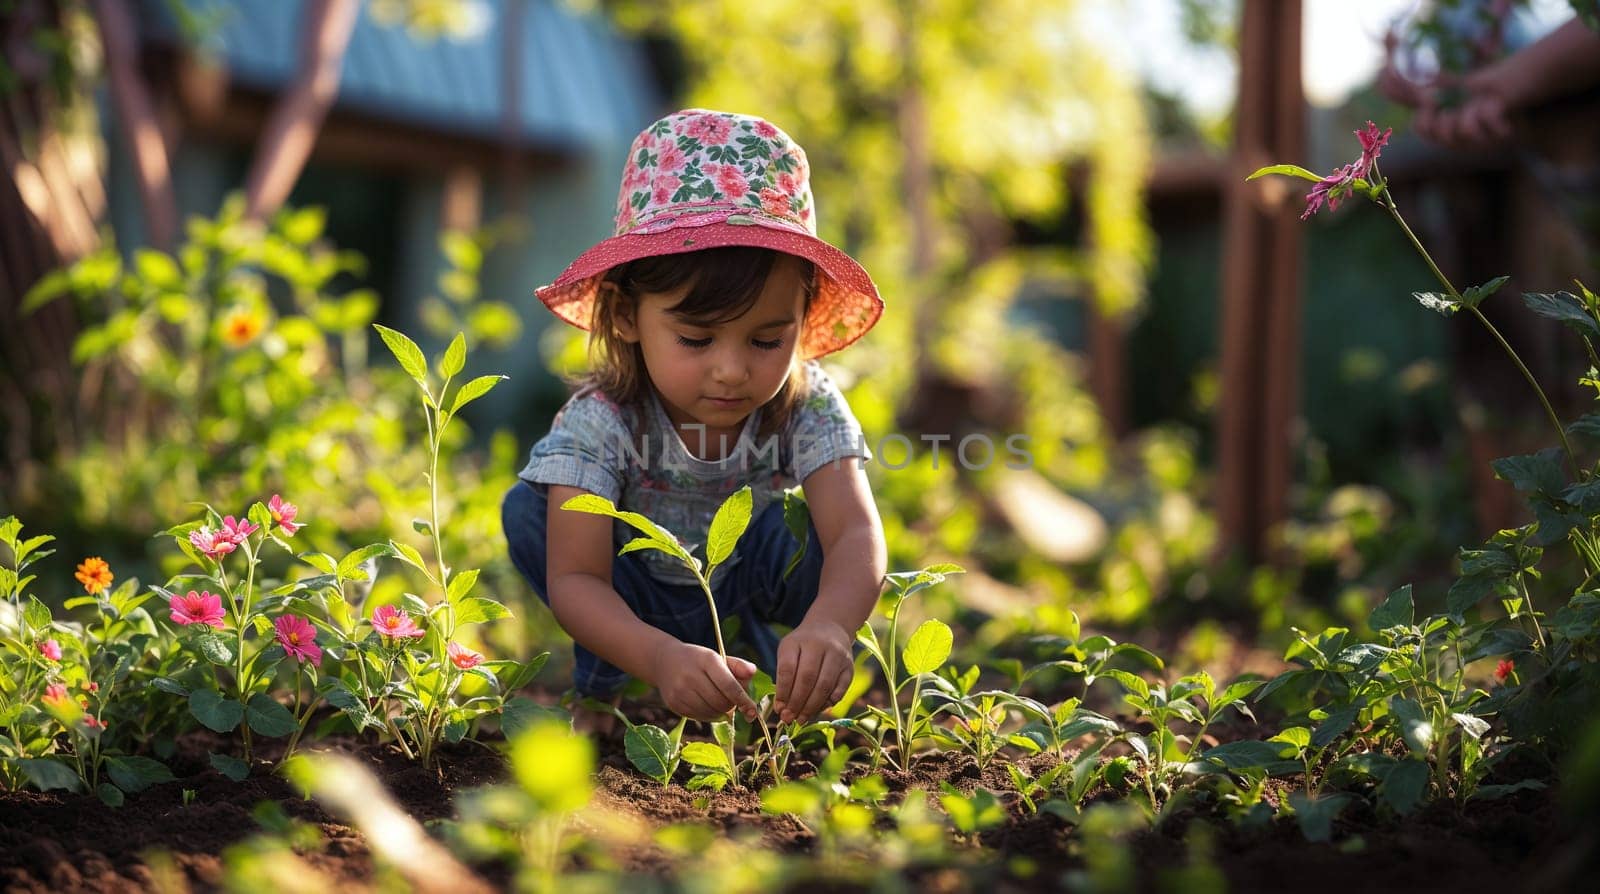 Young Girl Wearing a Sun Hat Tending to Garden Plants on a Sunny Day by chrisroll